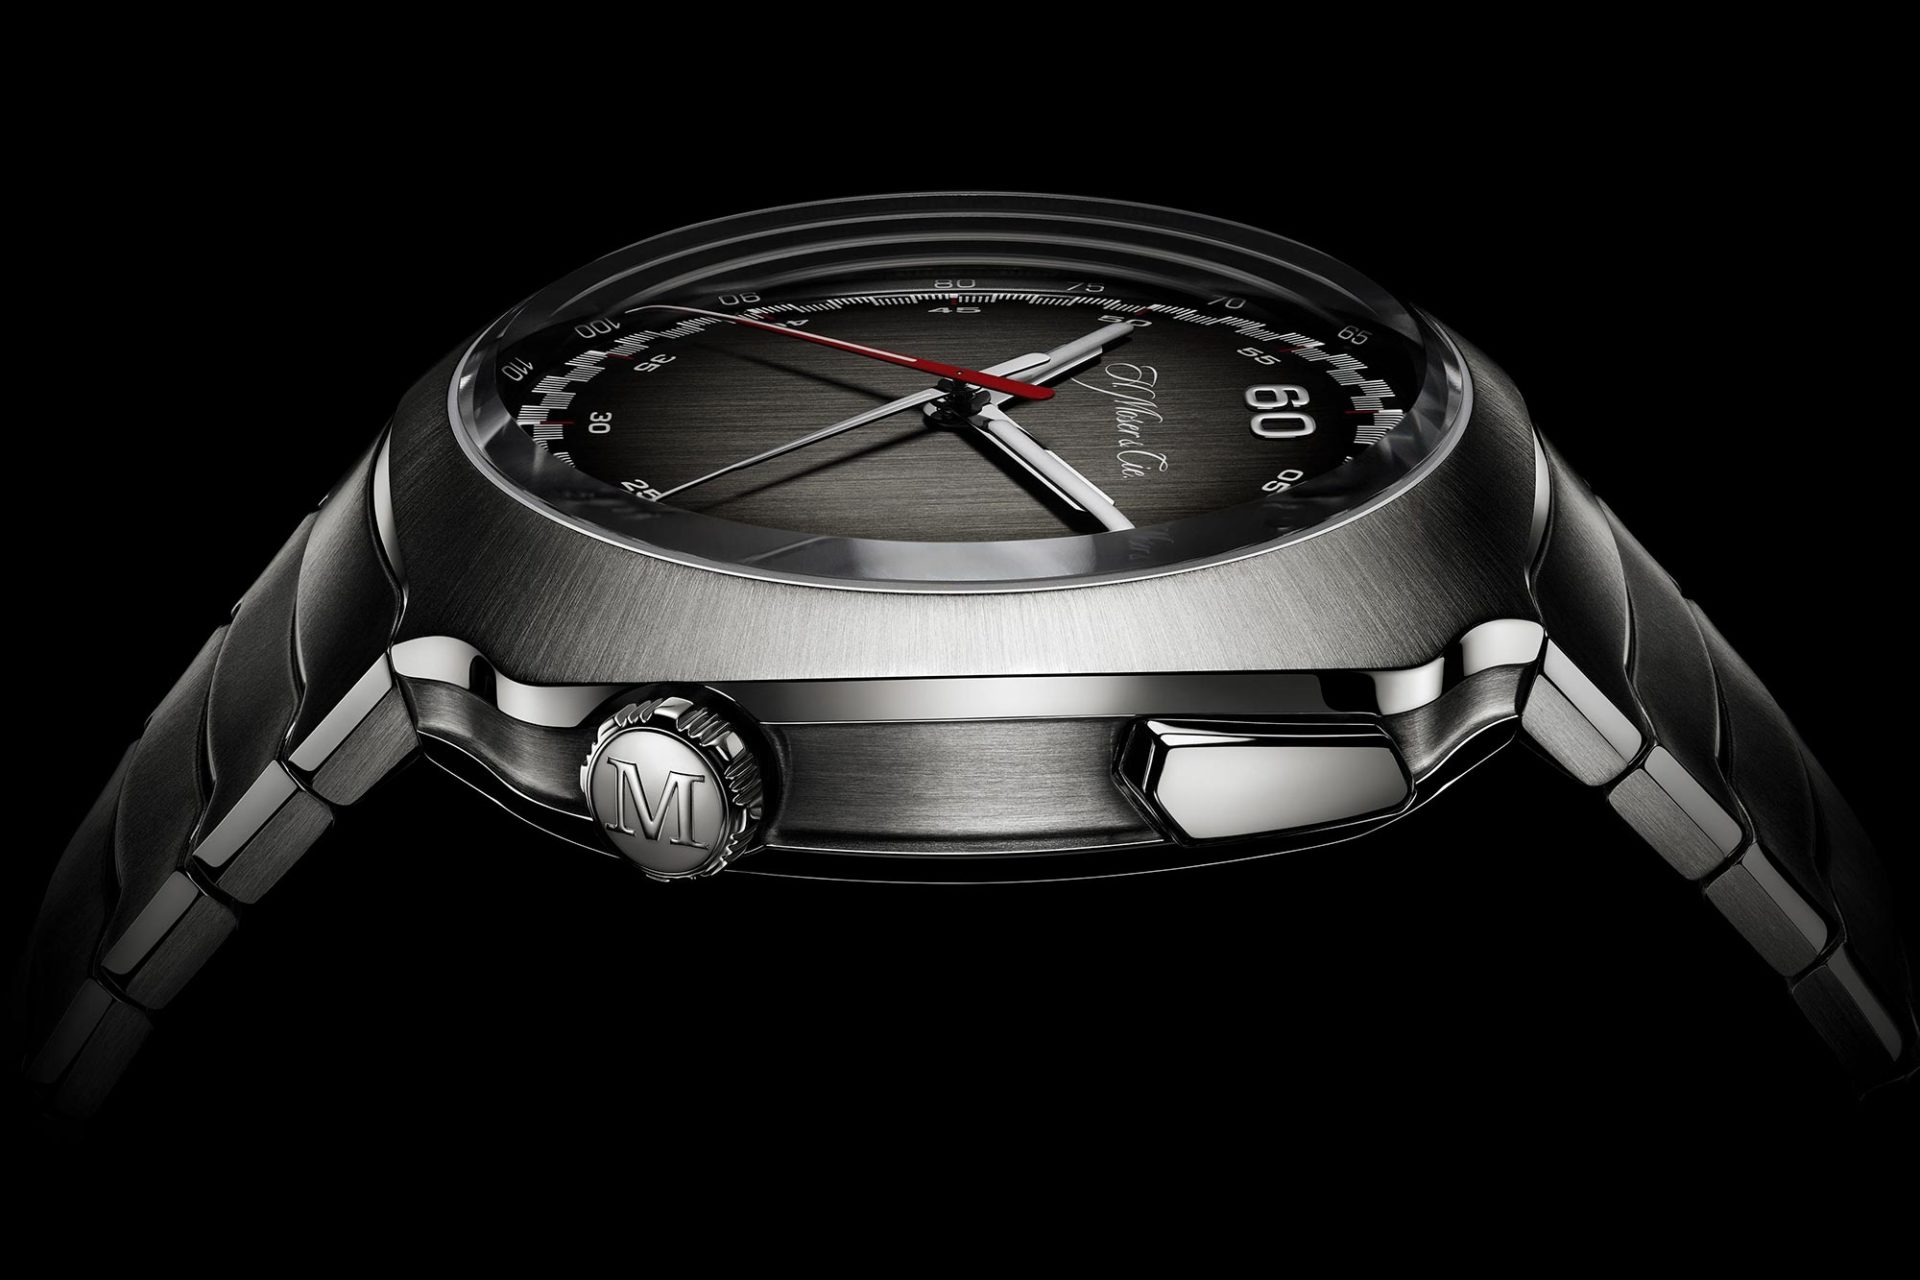 H. MOSER & CIE STREAMLINER FLYBACK CHRONOGRAPH AUTOMATIC